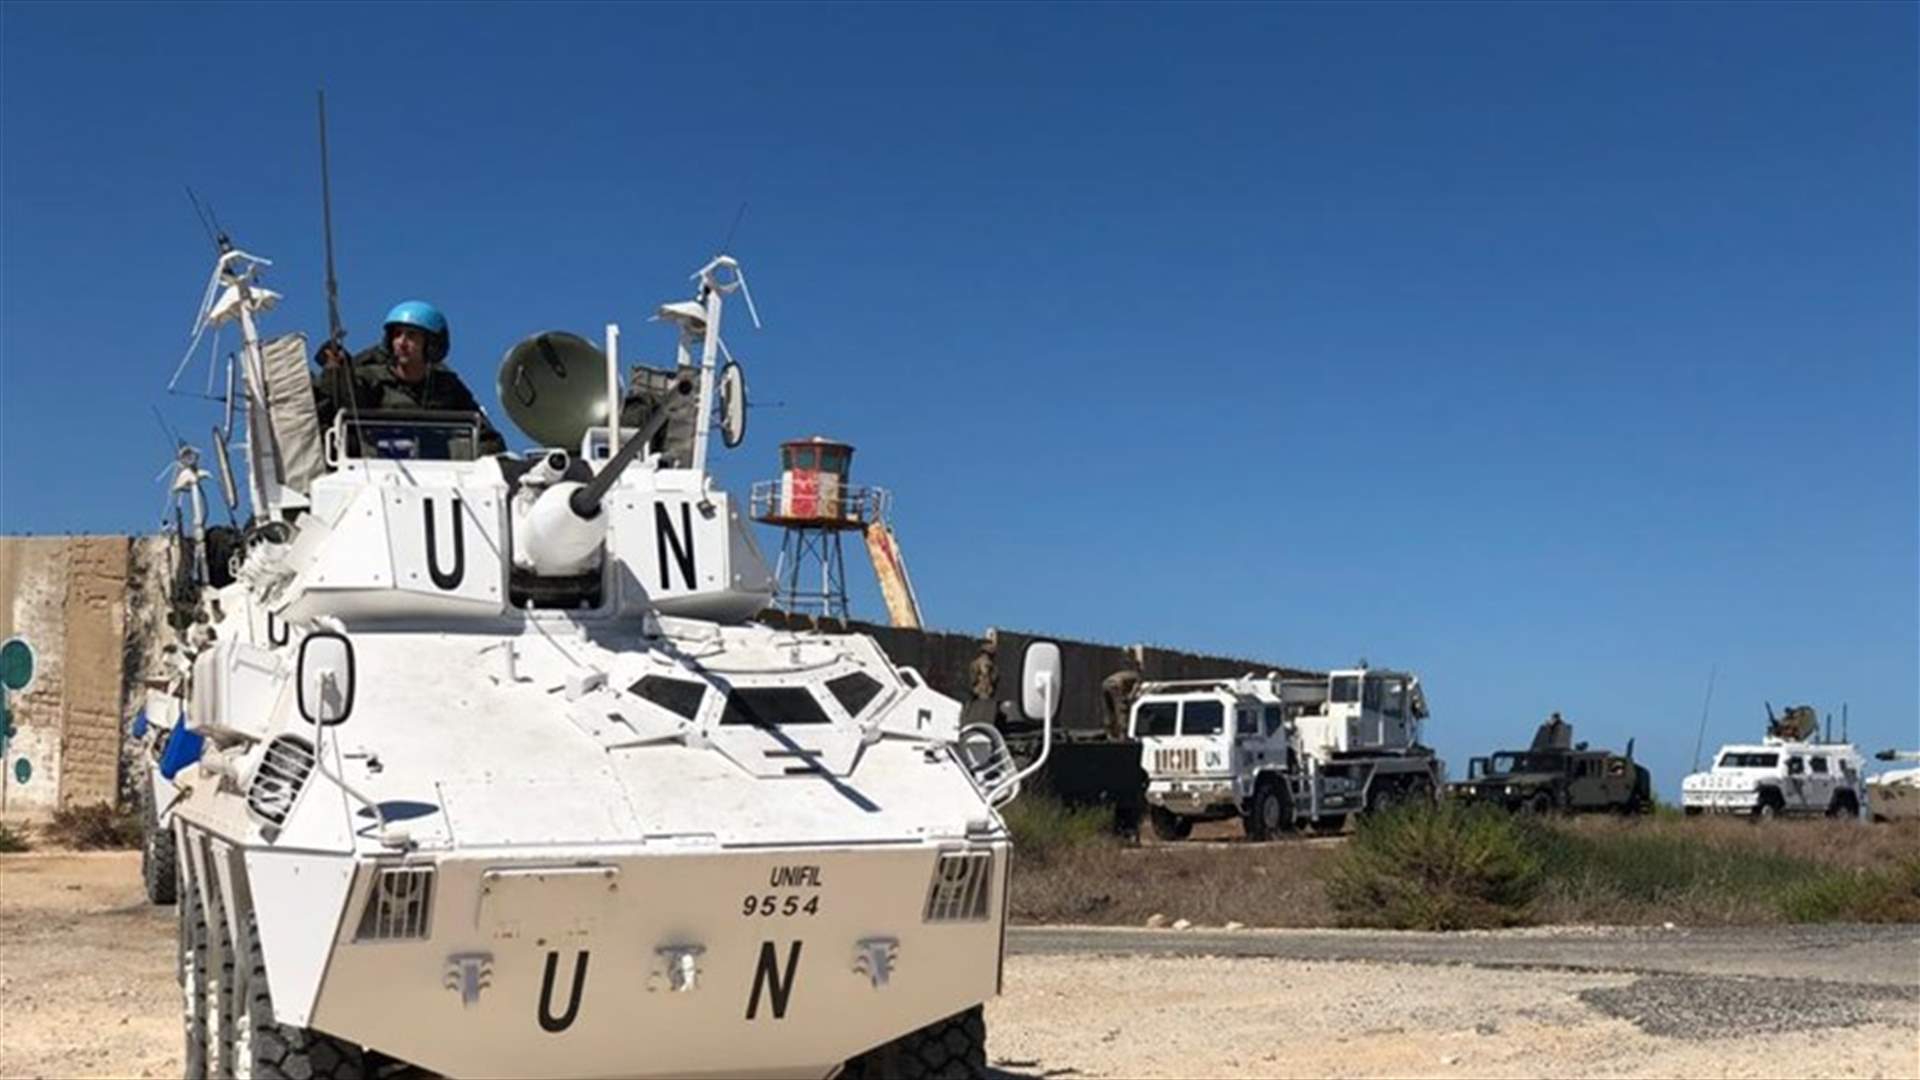 UNIFIL deploys to Beirut to assist LAF in the aftermath of port explosions